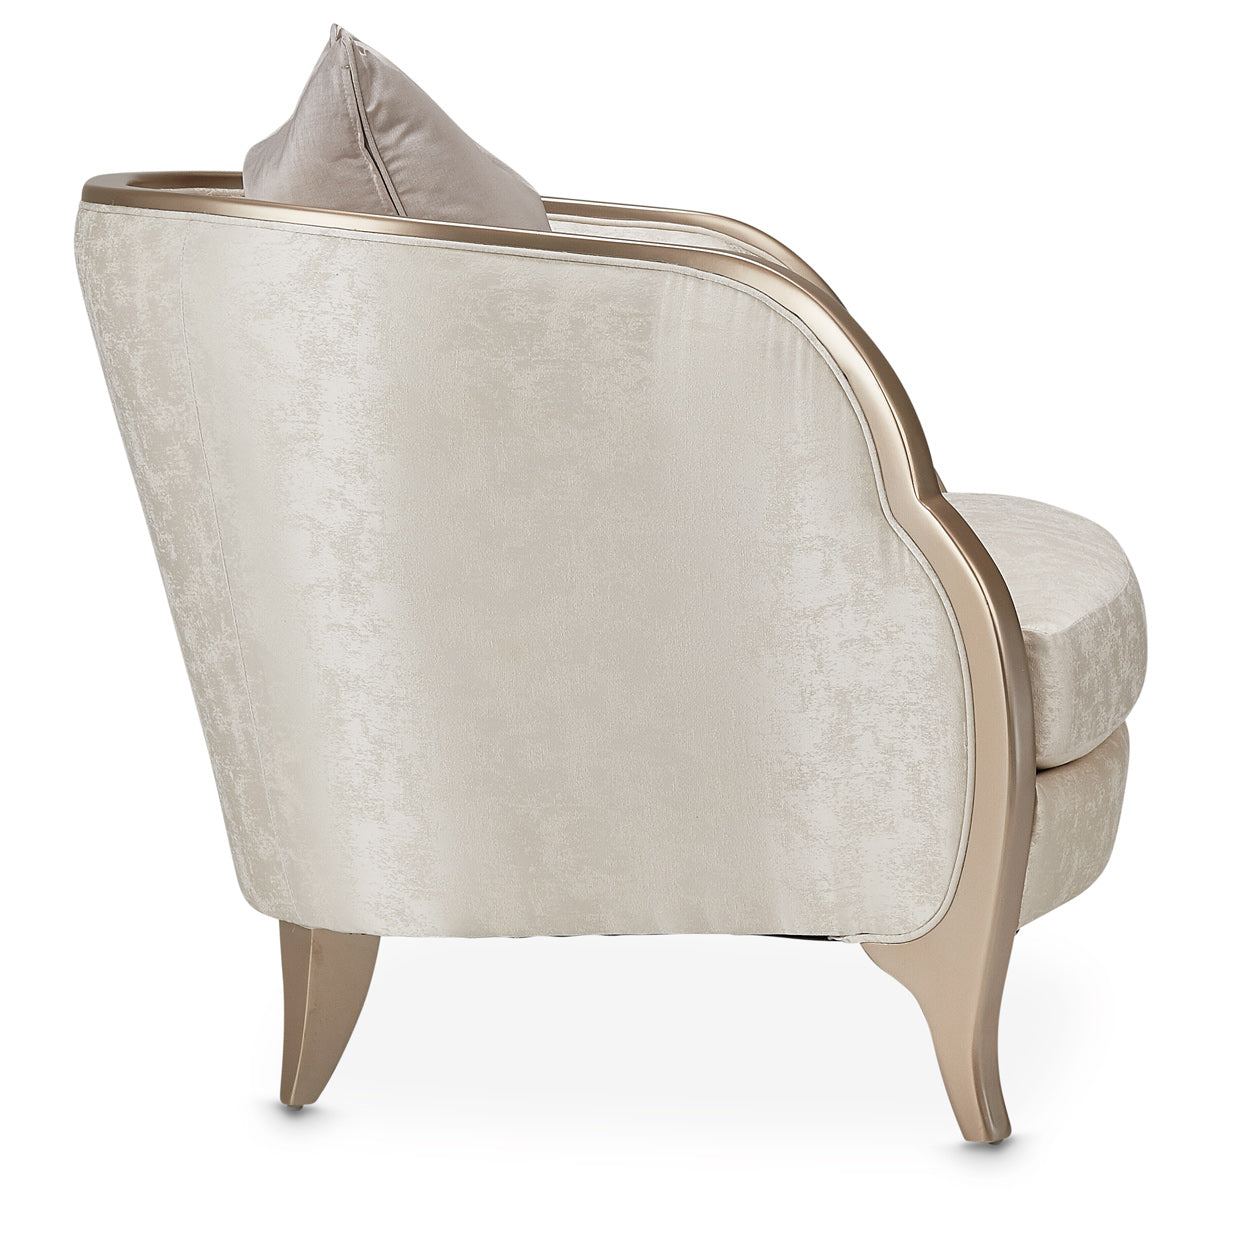 Malibu Crest Chair, Elegant design, Dramatic flared sides, Marbled jacquard upholstery, Cloud White color, Chardonnay finished hardwood, Classy statement, Winged sides, Accent pillow included, Living room furniture, dream art, Michael amini